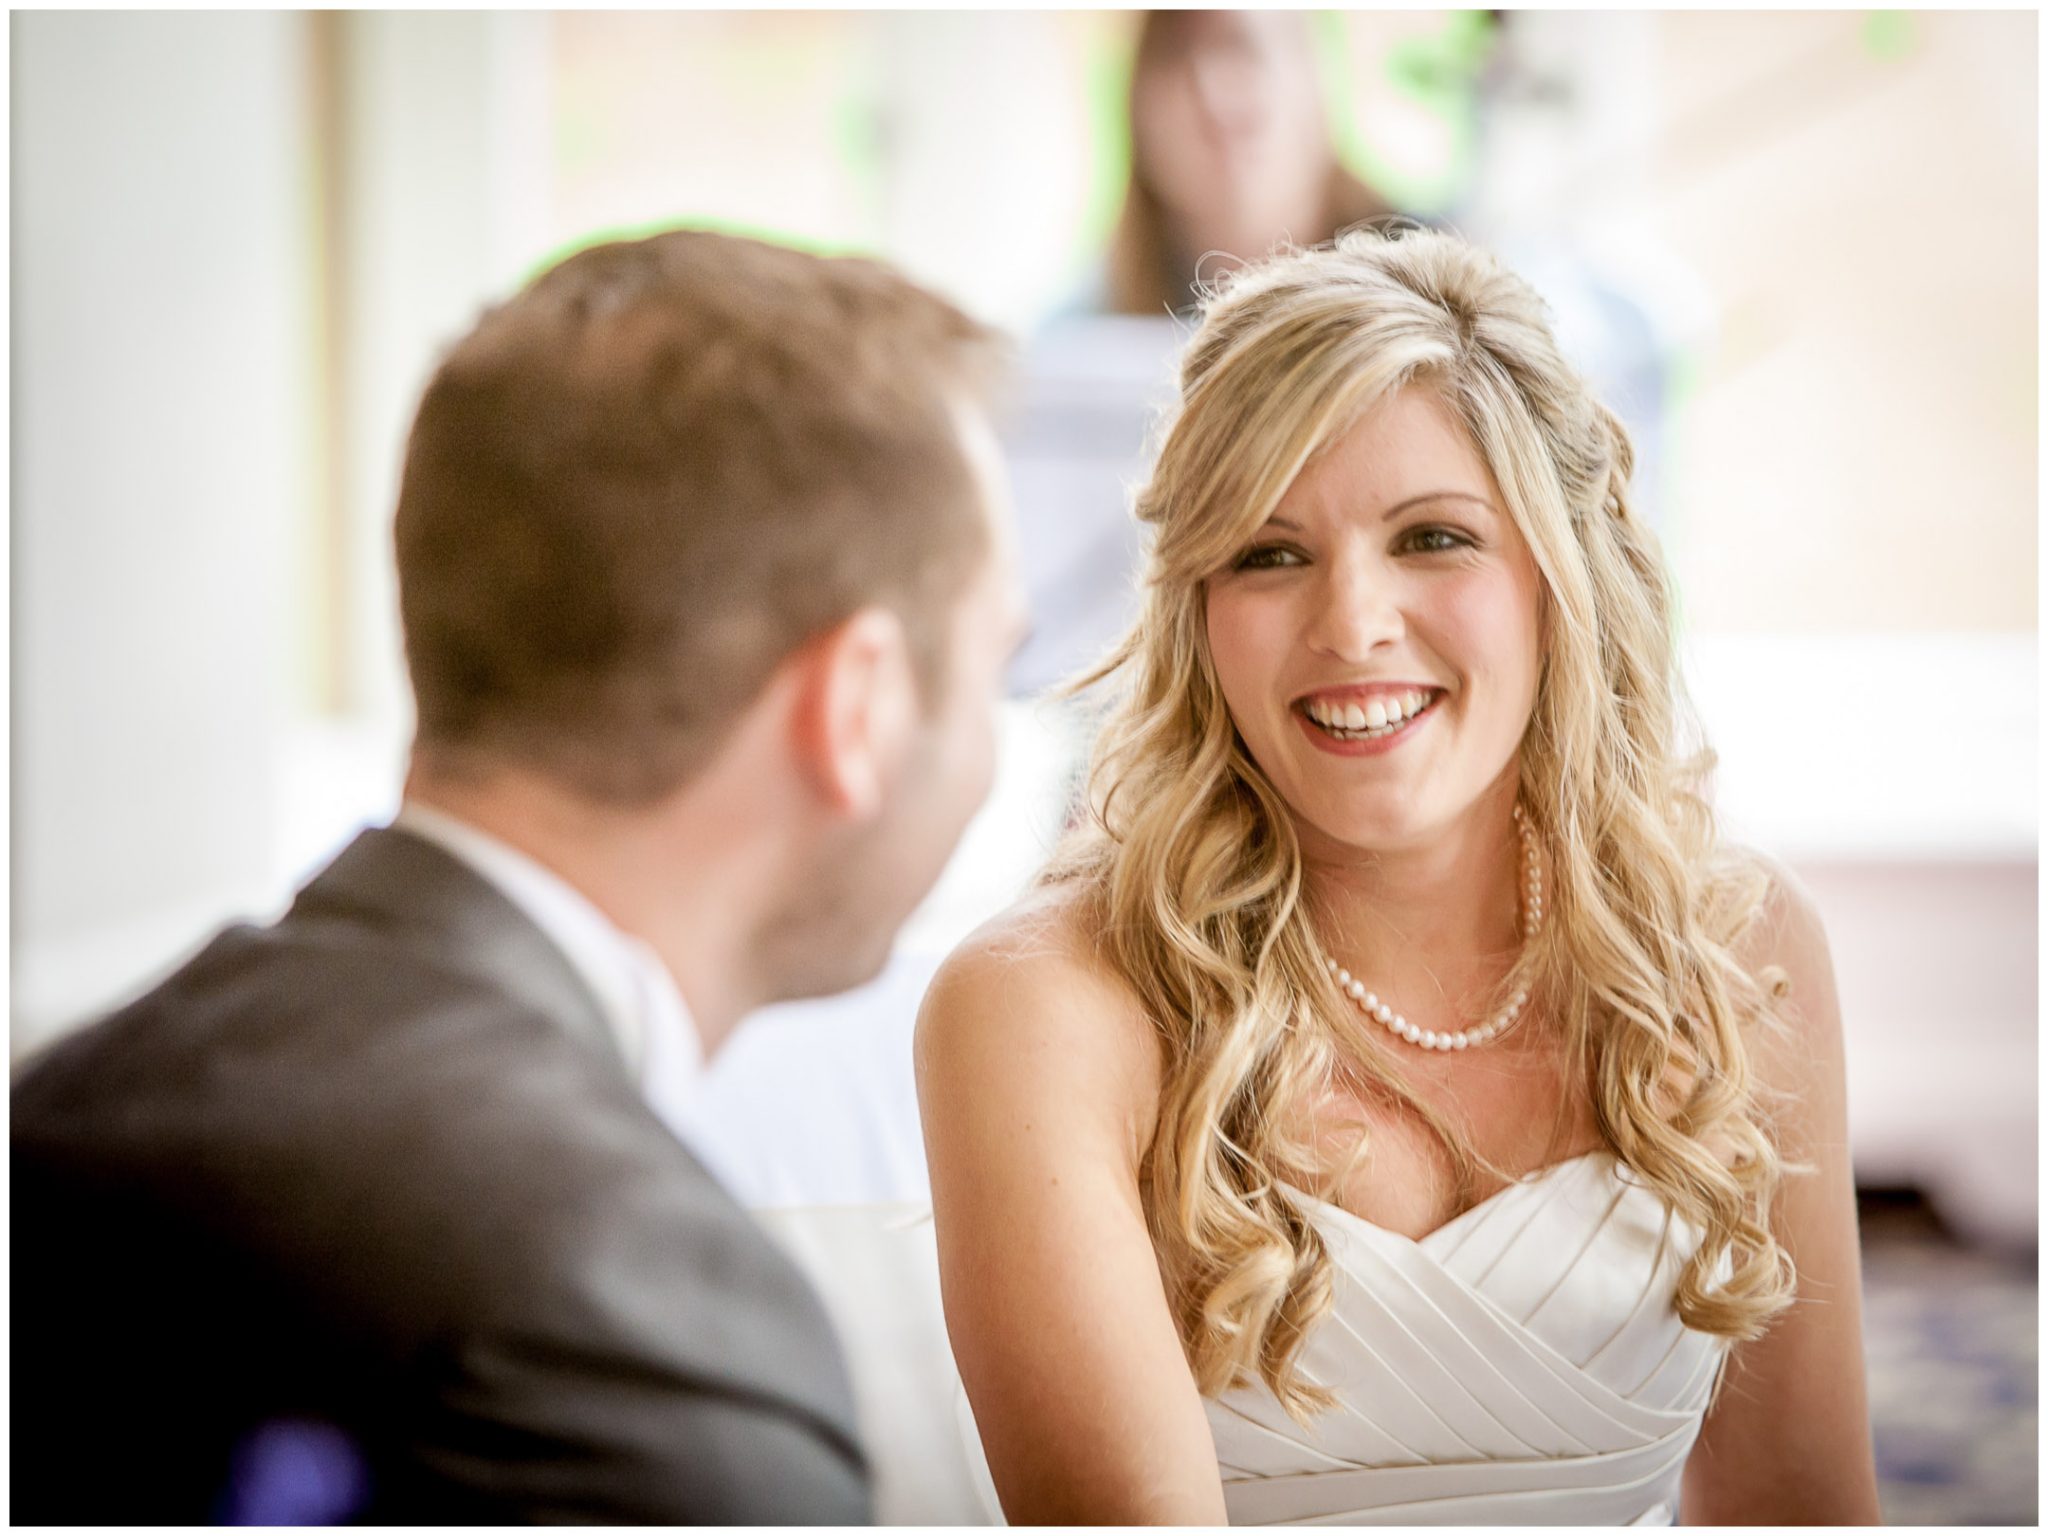 Audleys Wood wedding photography bride smiles at groom